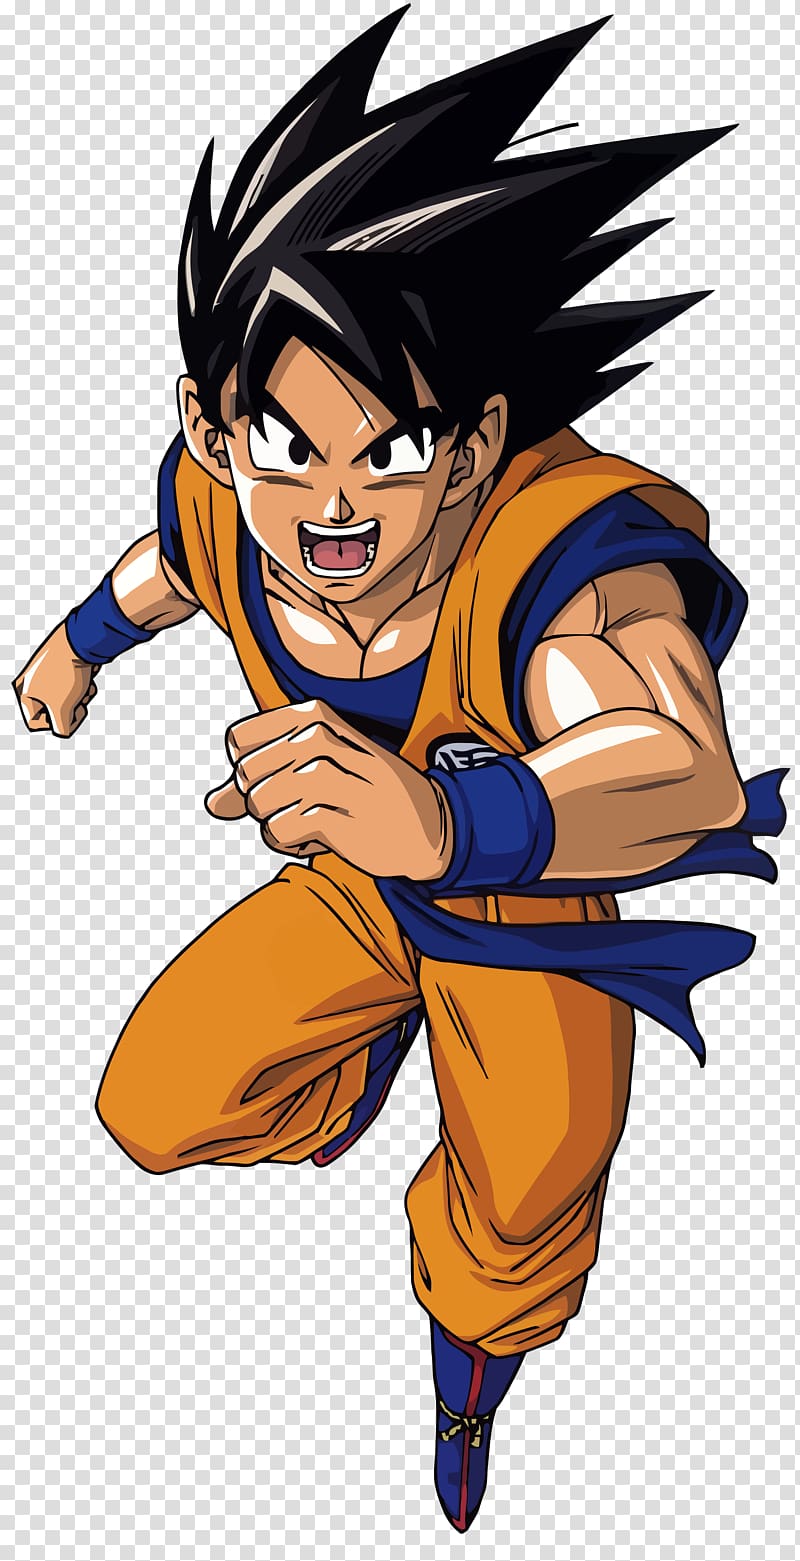 Dragon Ball Z Goku Gohan Android 18, Normal transparent background PNG clipart